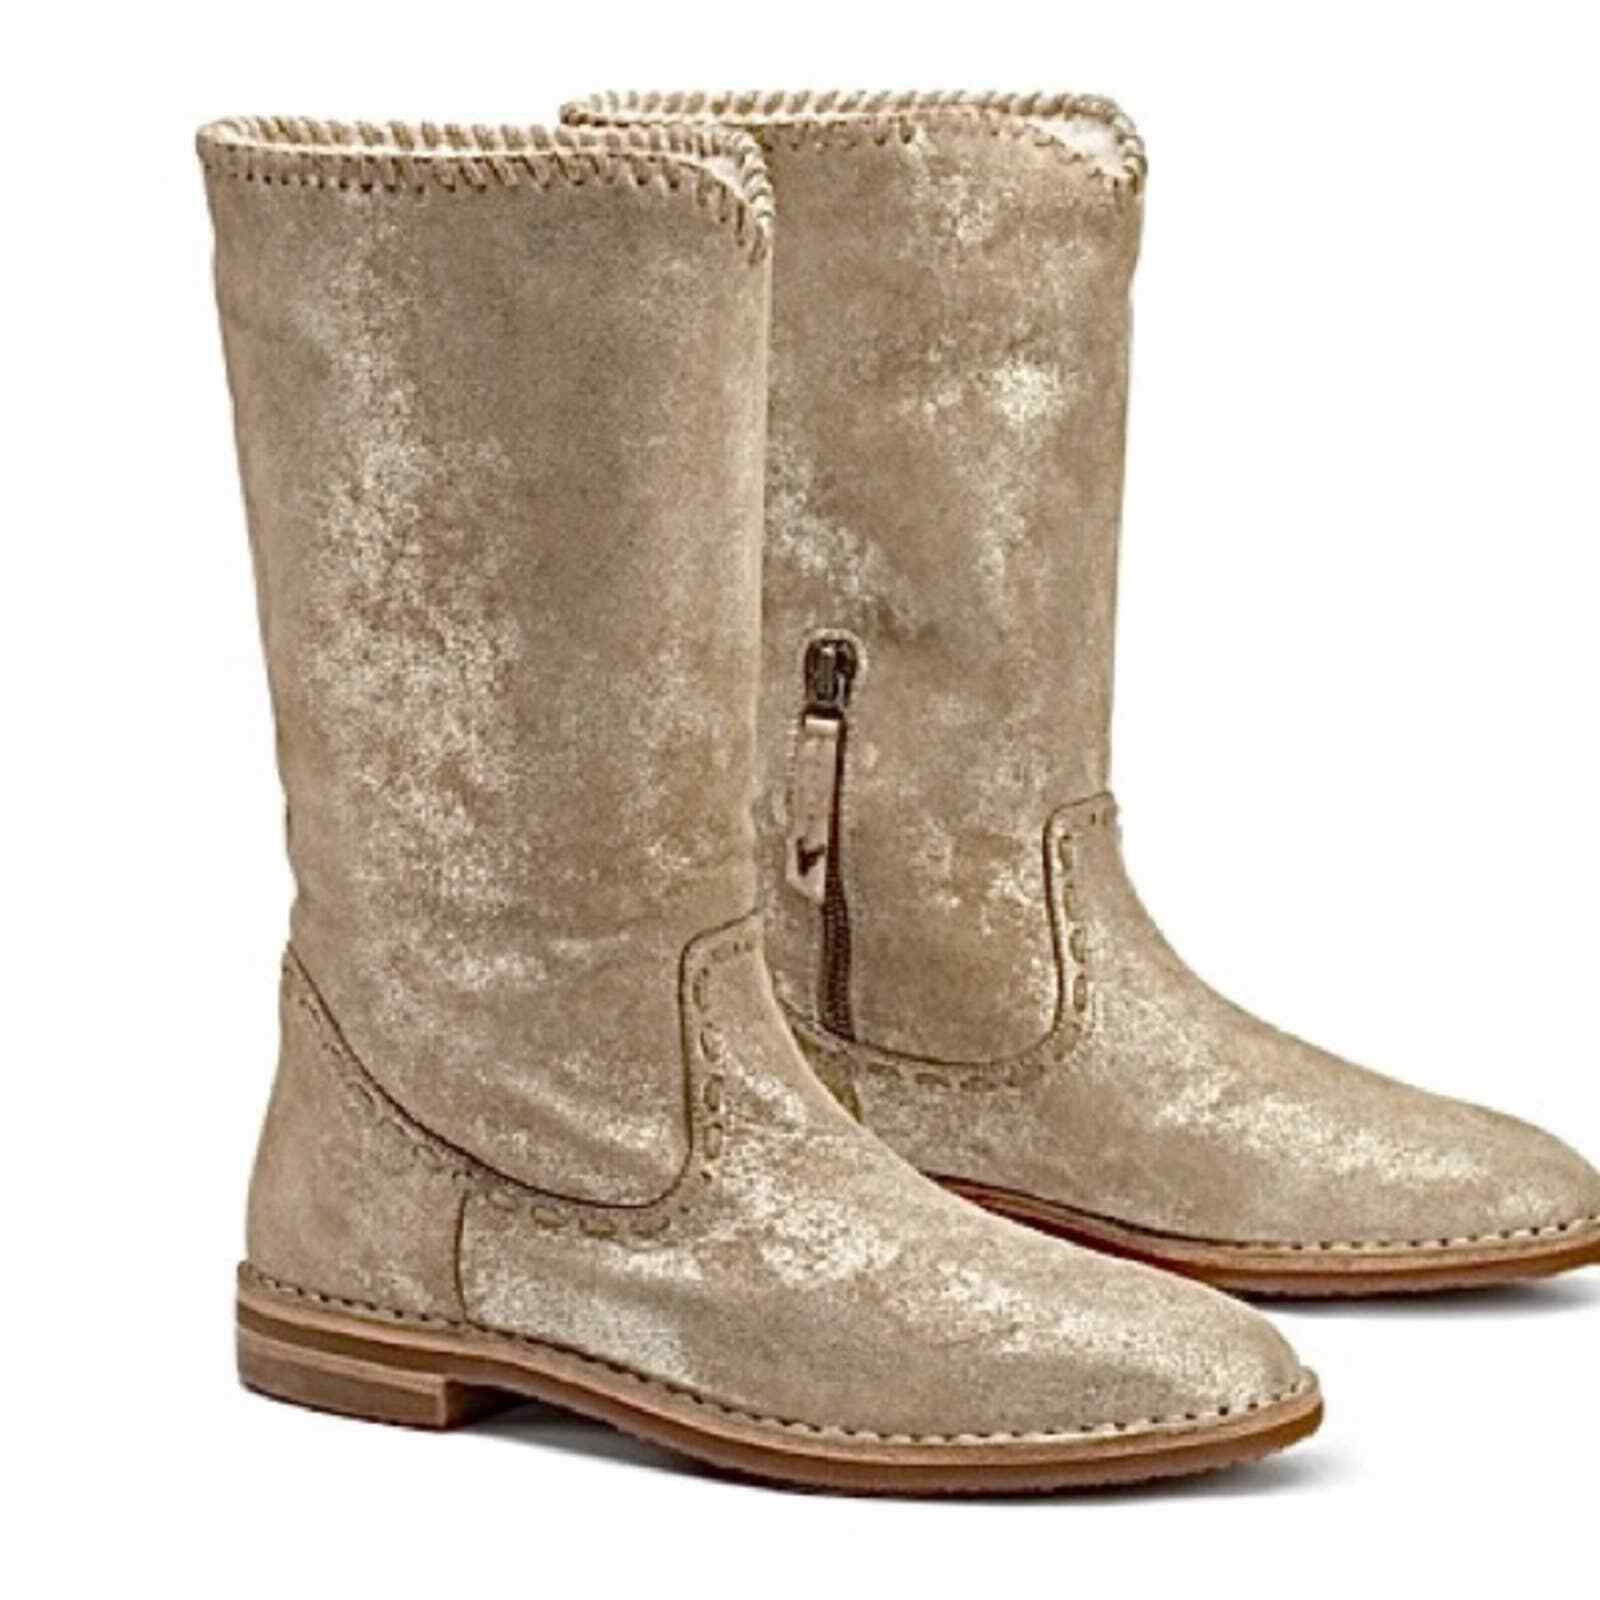 NIB Trask Audra Taupe Tan Metallic Suede & Genuine Shearling Lined Boot Size 9